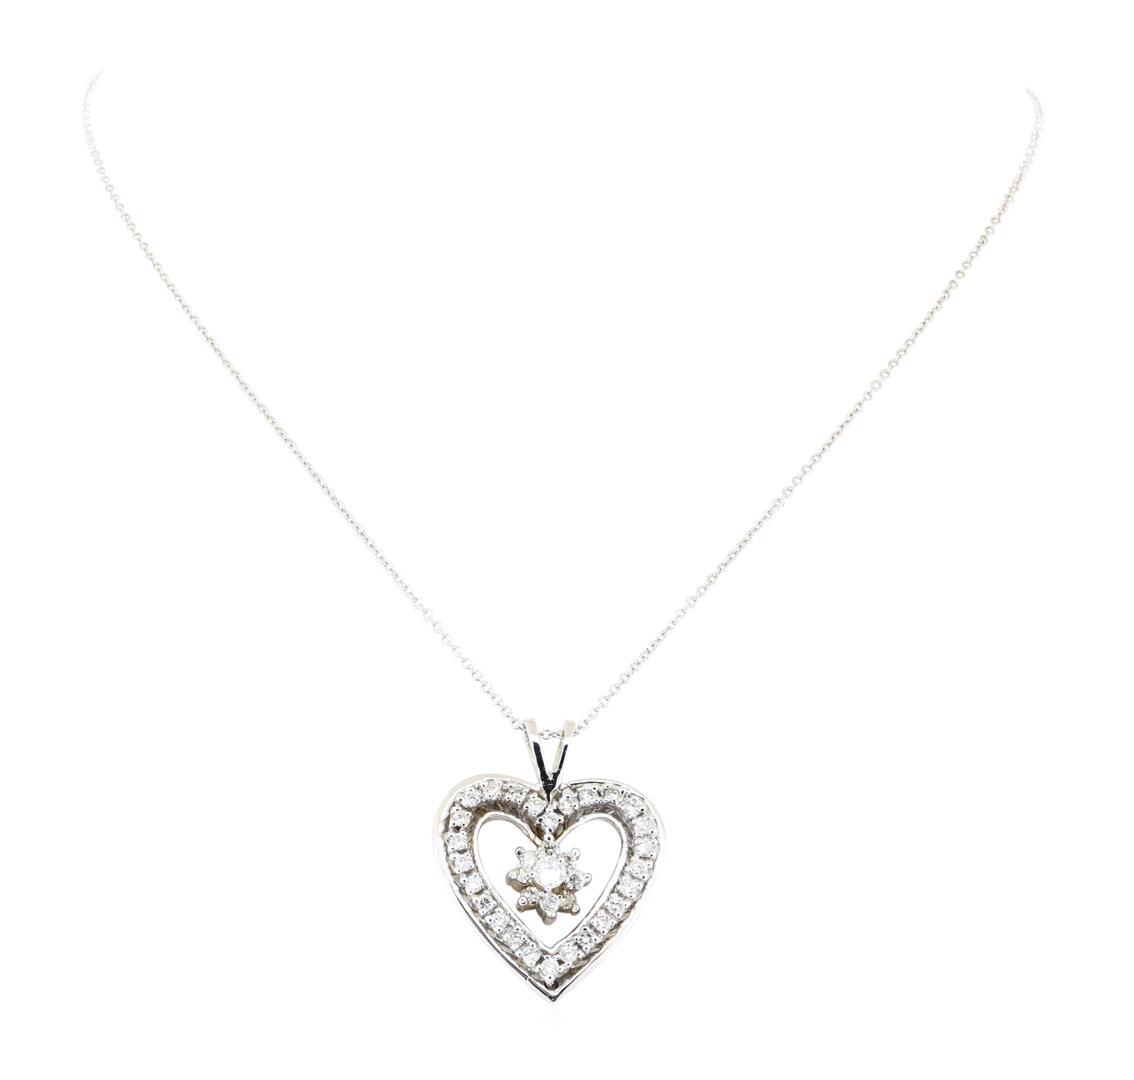 1.23 ctw Diamond Pendant And Chain - 14KT White Gold